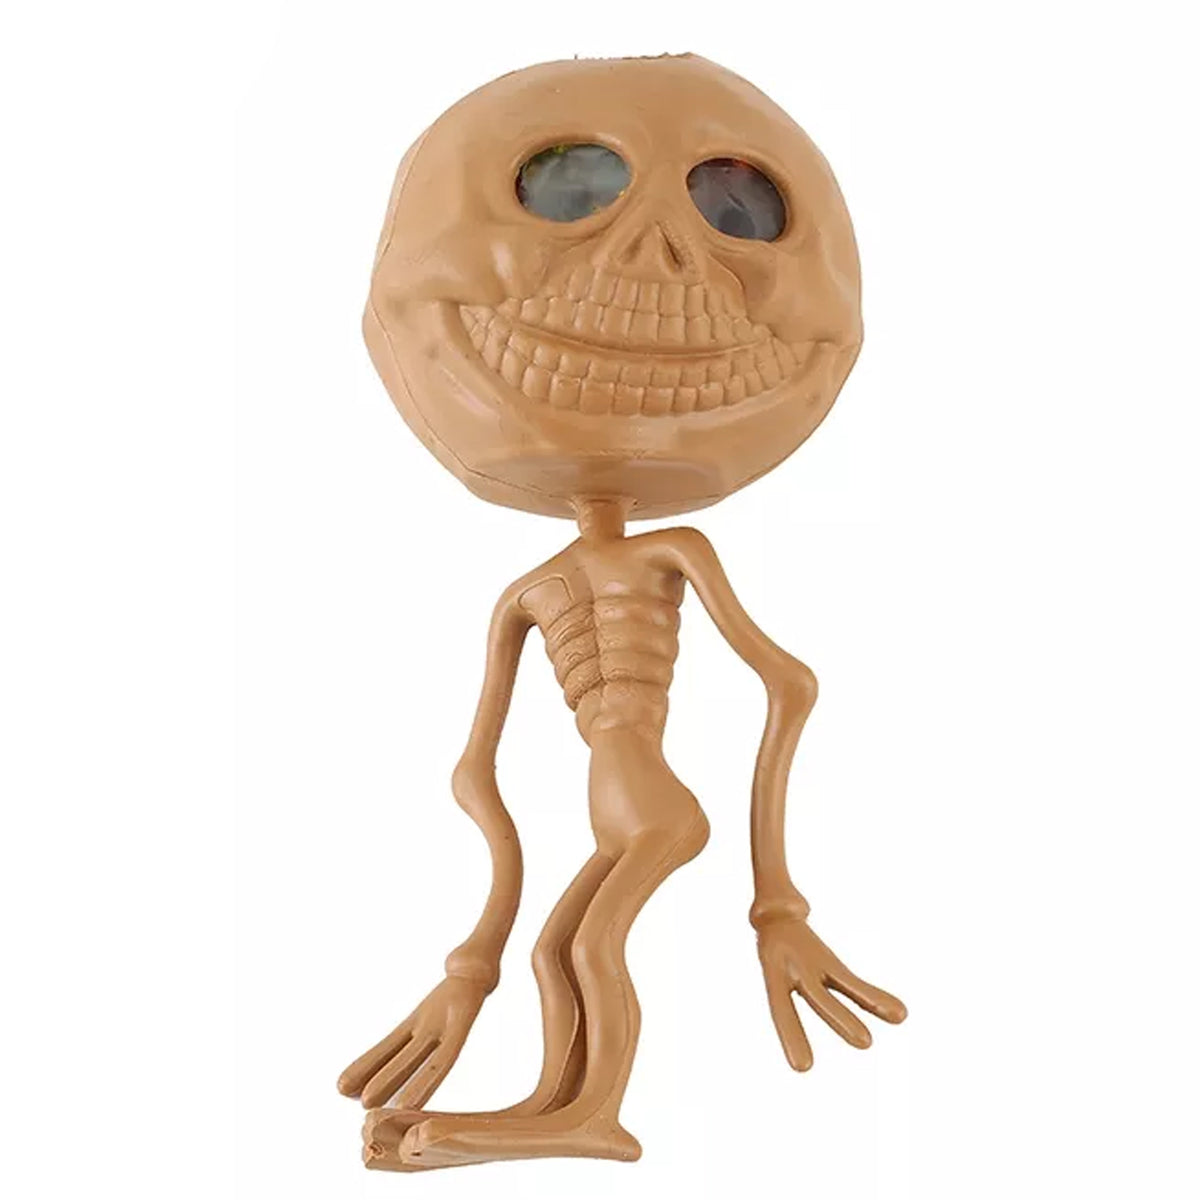 Alien Ghost Squeeze Toys